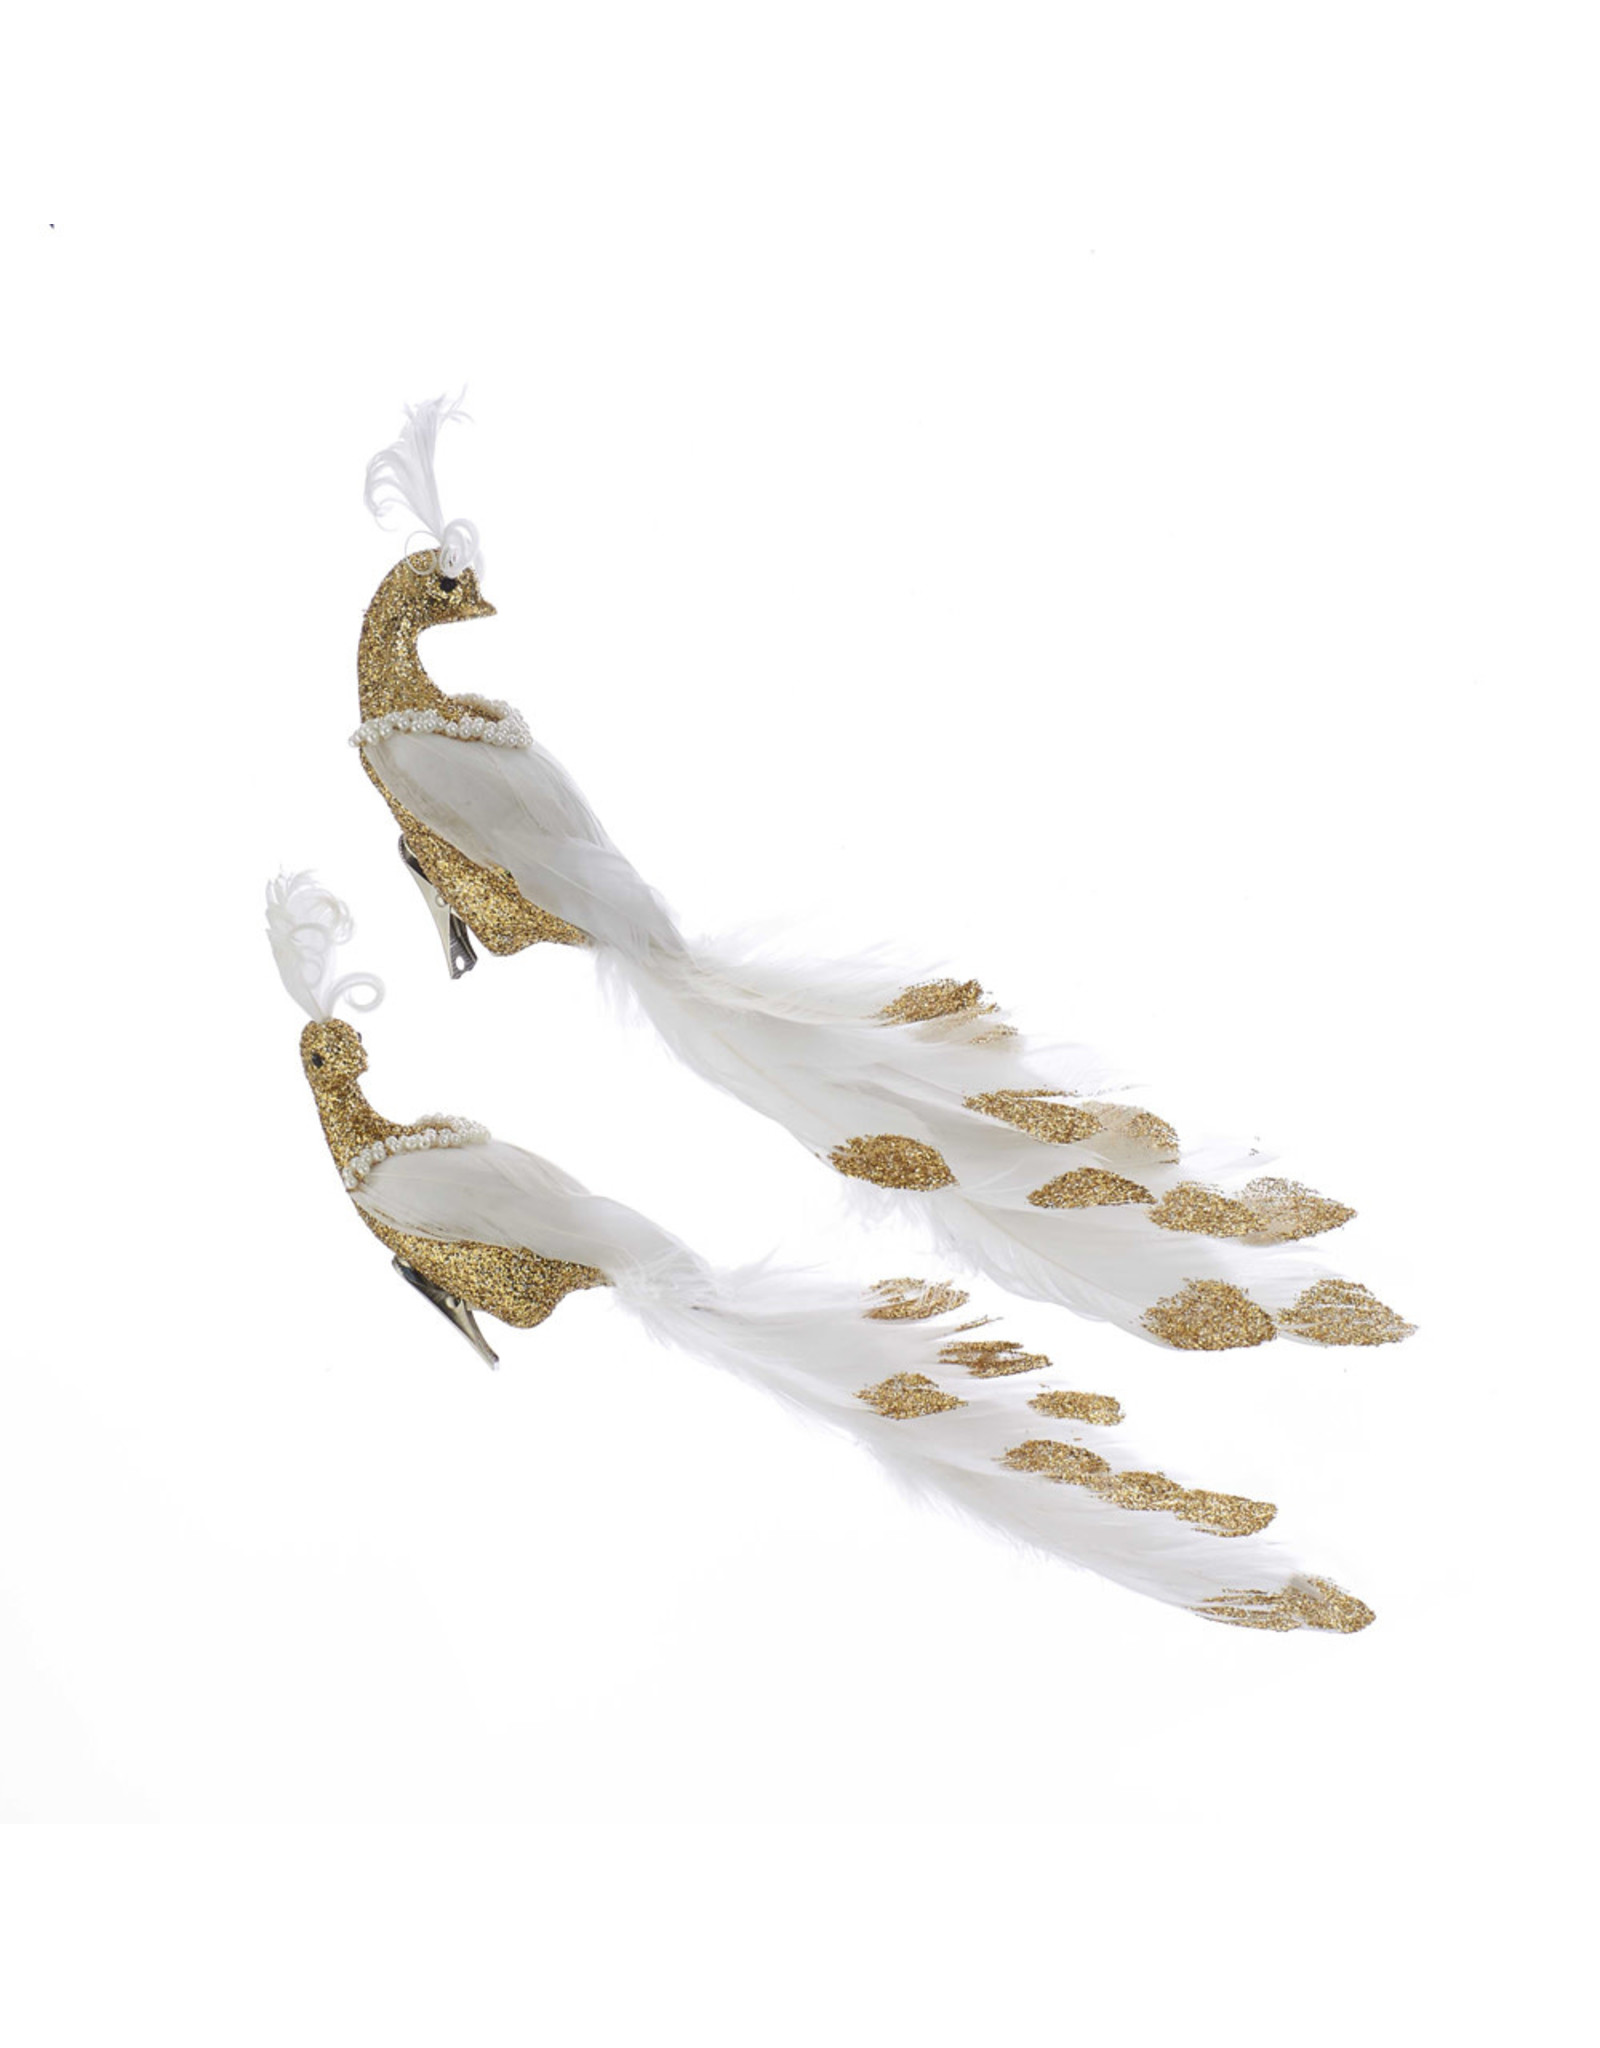 Kurt Adler Feather Peacock W Pearls Clip-On Ornaments 2 Assorted